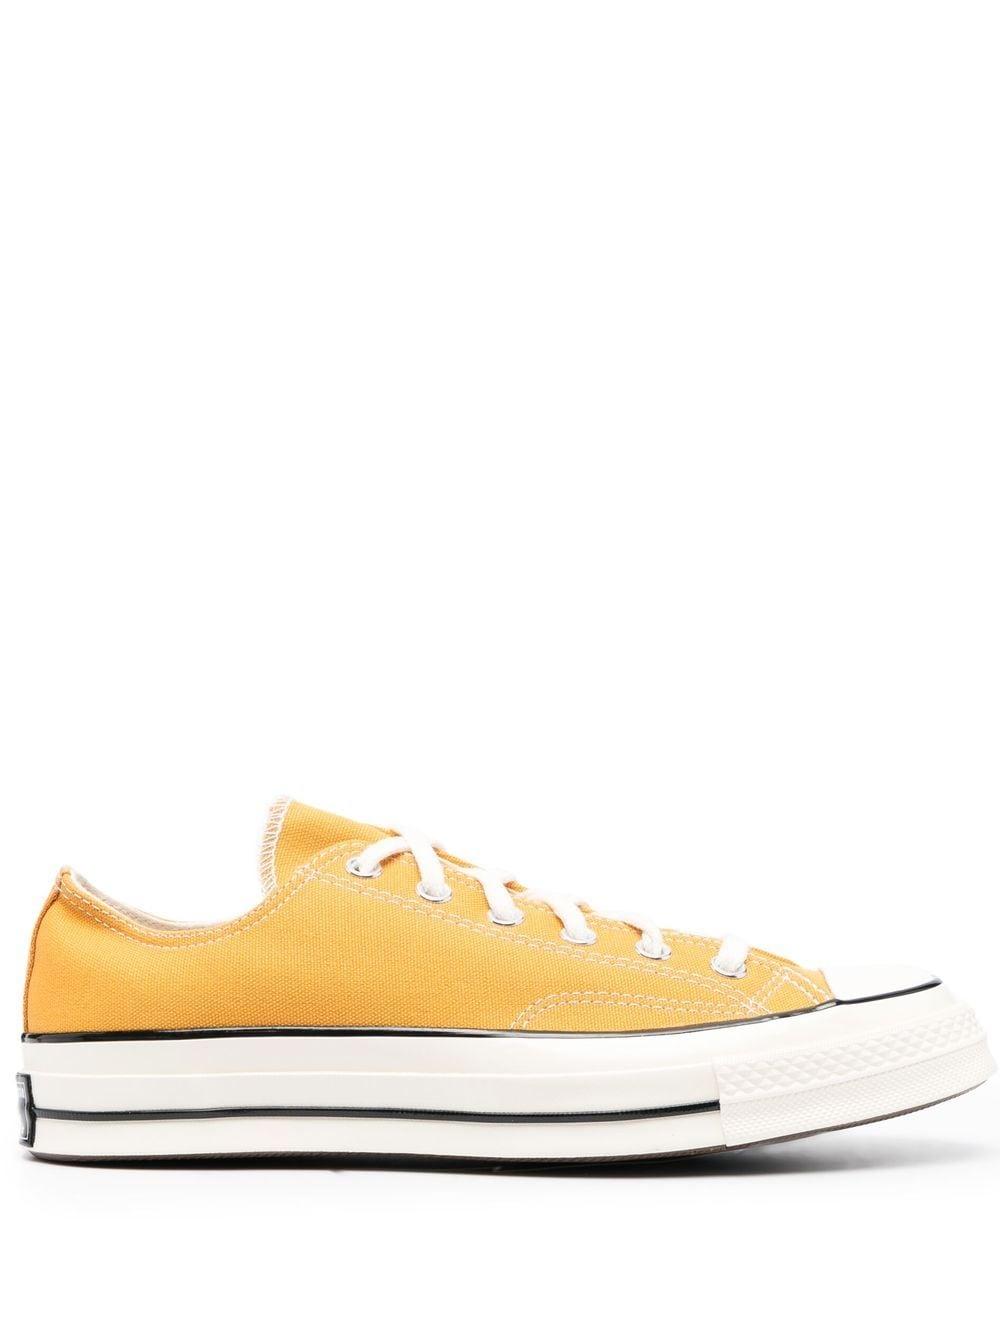 Converse Chuck 70 Vintage Canvas Sneakers in Metallic | Lyst